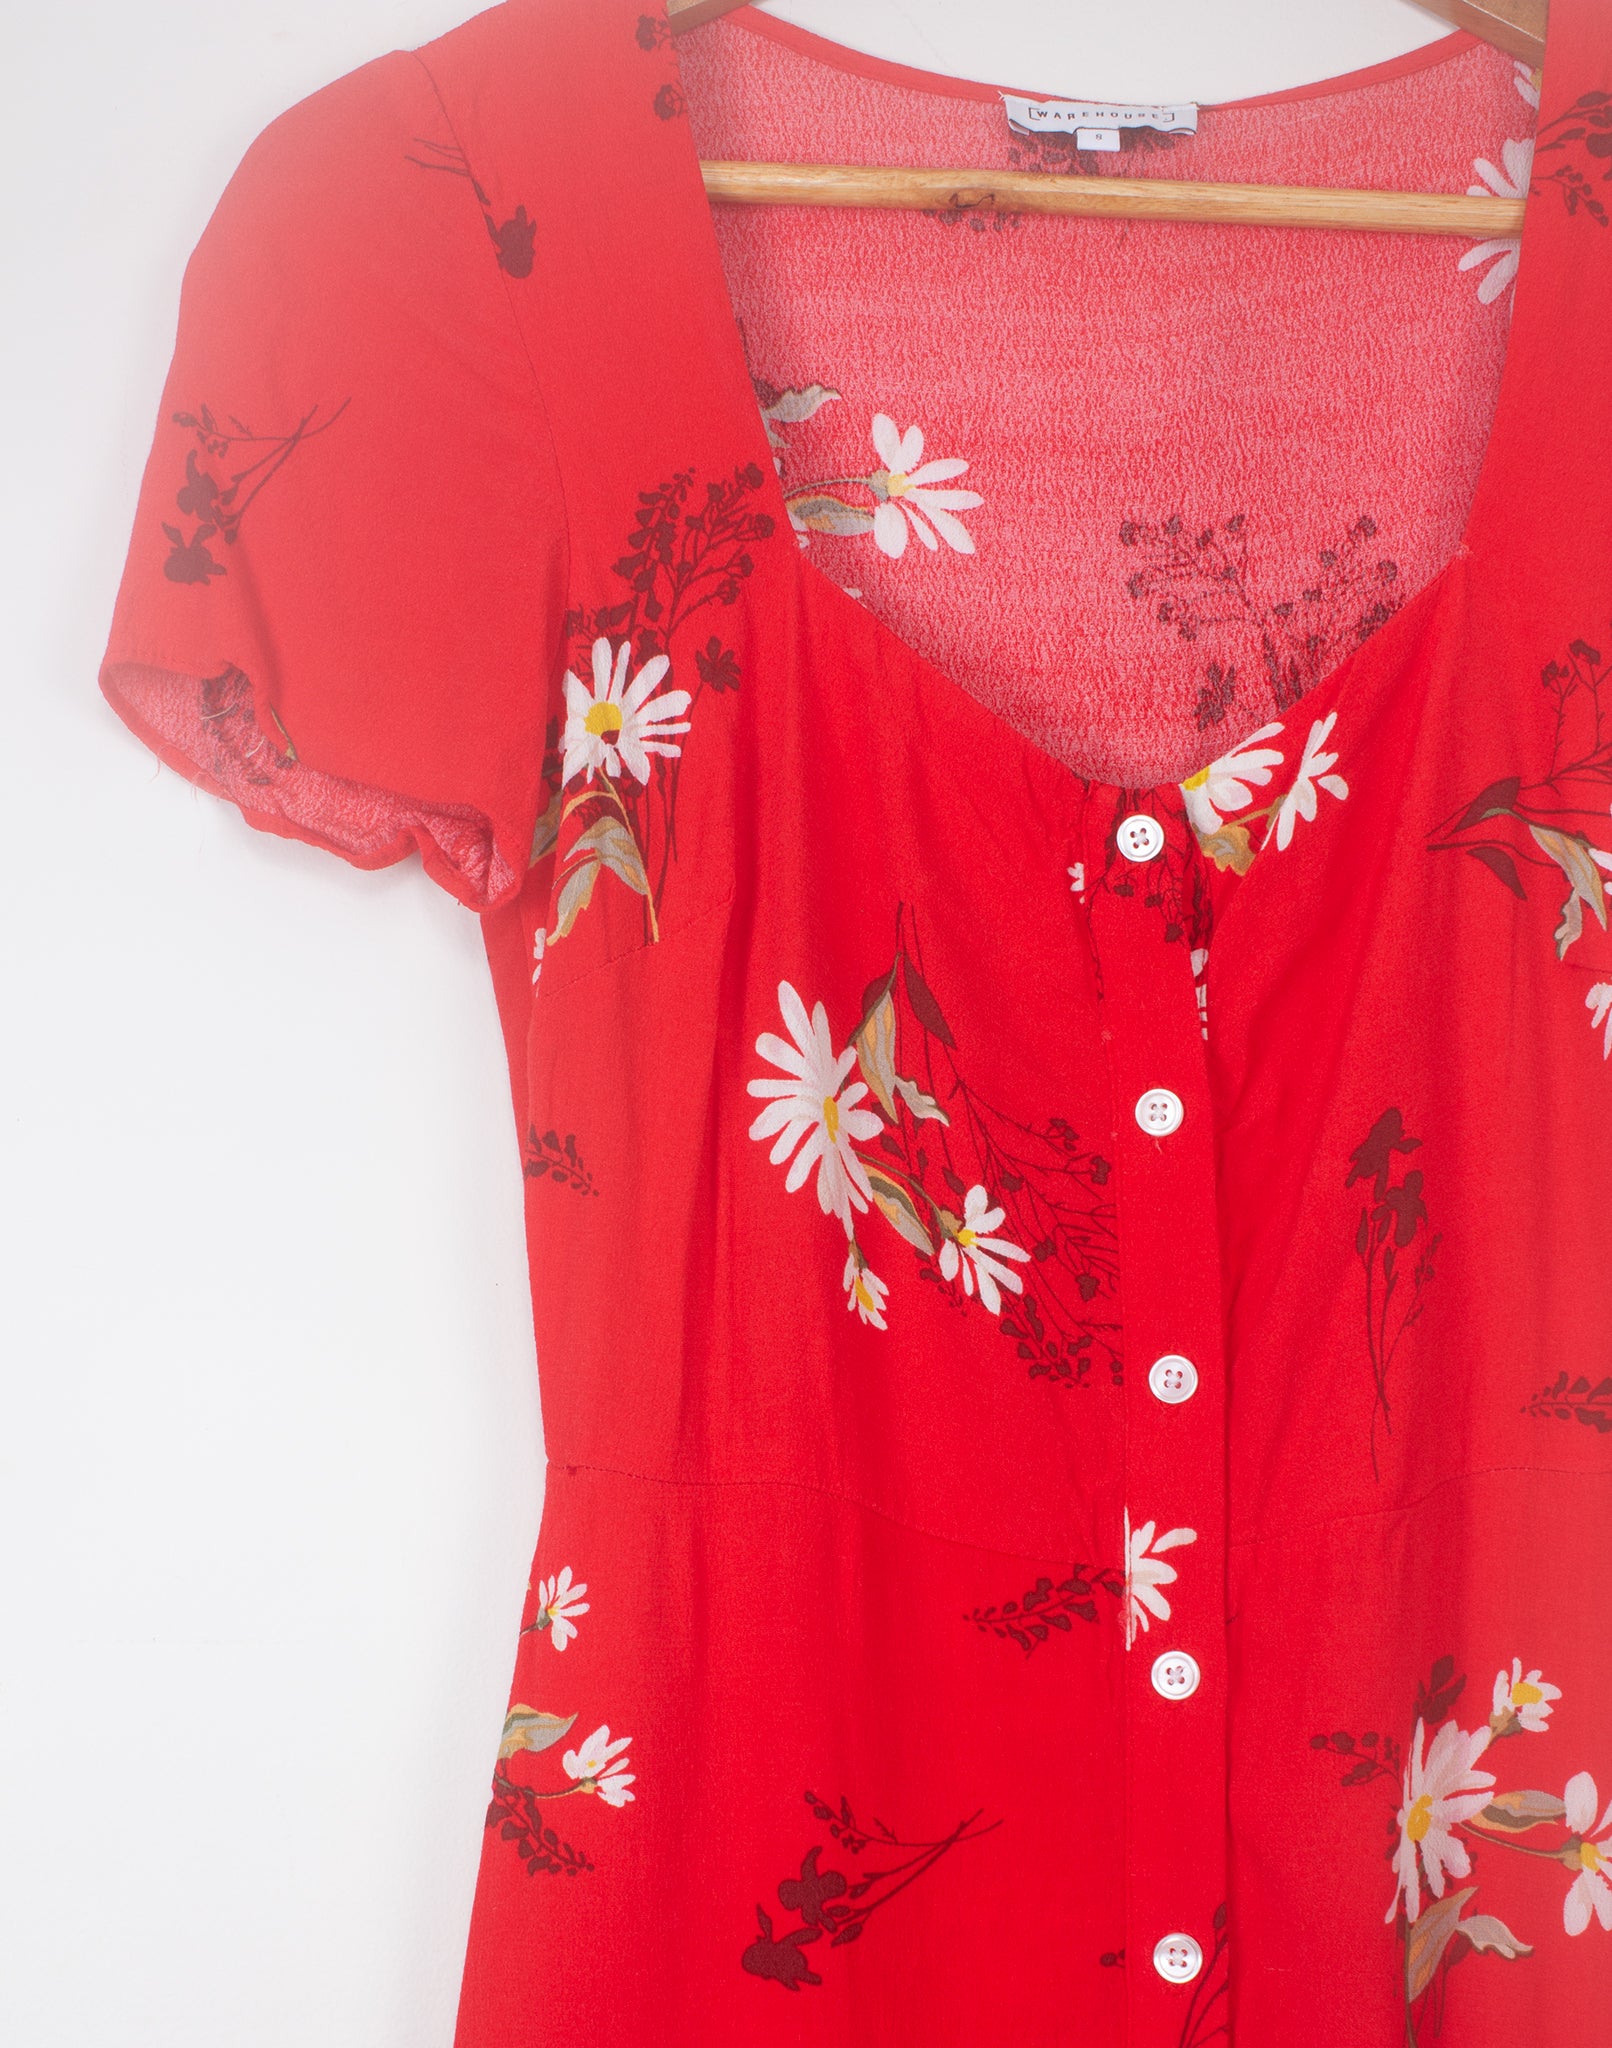 Warehouse Red Daisy Floral Dress - Size XS